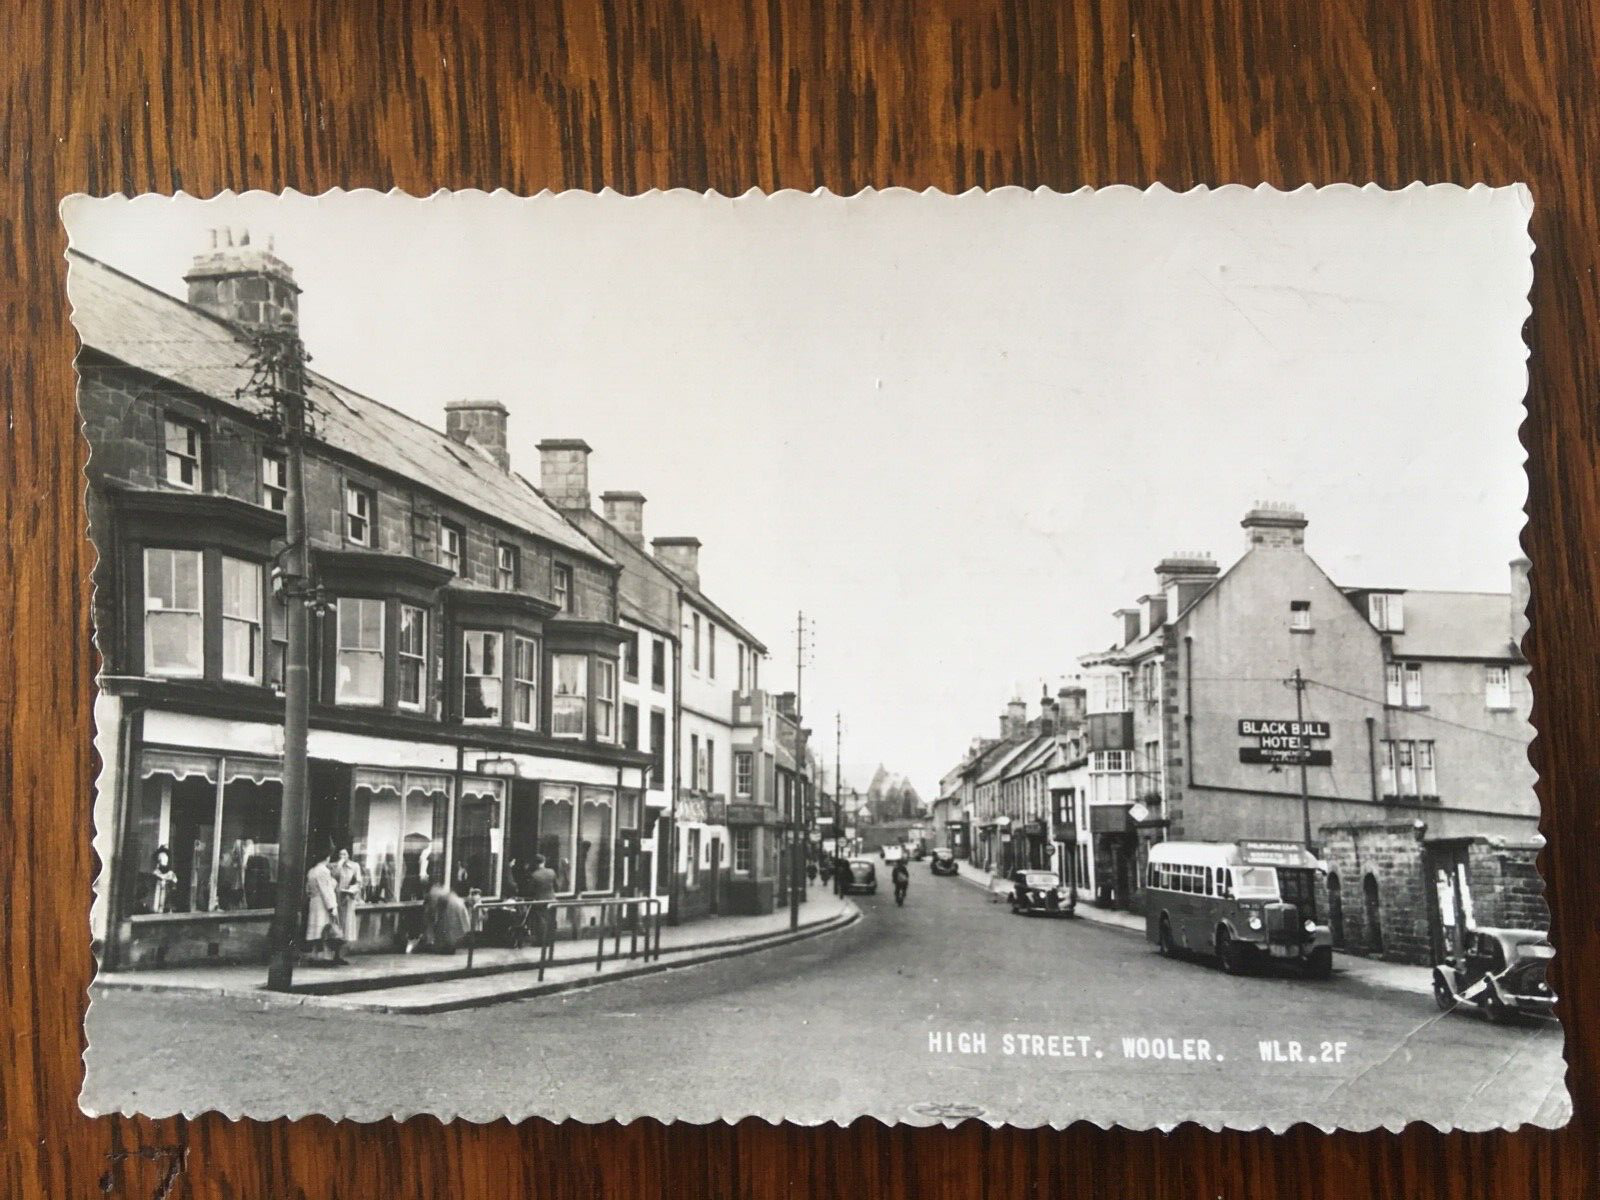 House Clearance - HIGH STREET, WOOLER, NORTHUMBERLAND Vintage 1966 FRITHS Real Photograph Service